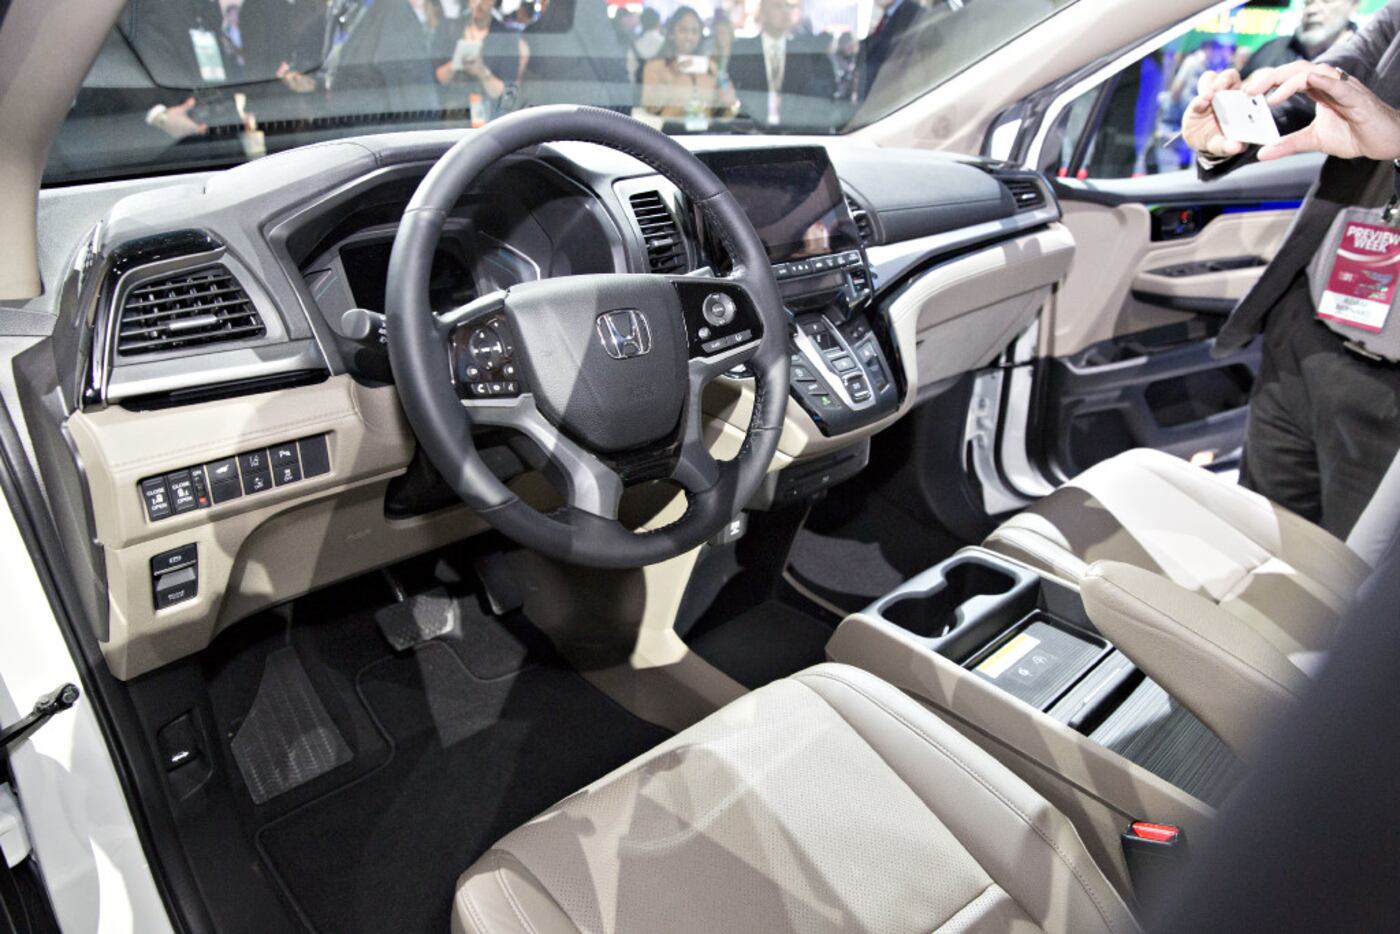 An attendee uses a mobile device to photograph the interior of the 2018 Honda Motor Co....